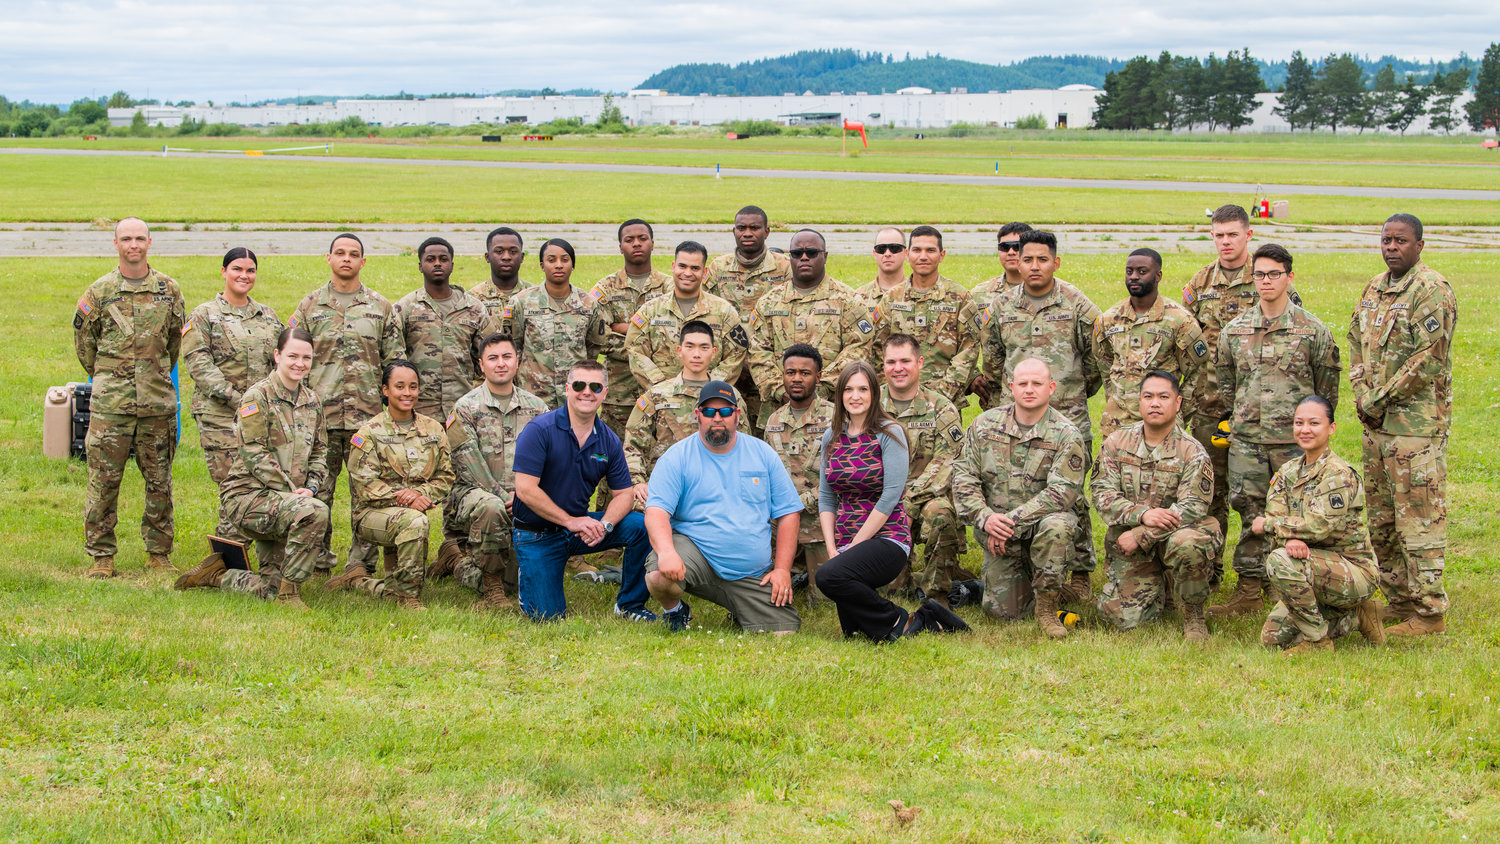 Staff from the Chehalis-Centralia Airport pose for a photo with members of the United States Army and Airforce from Joint Base Lewis-McChord during a military training exercise Wednesday in Chehalis.